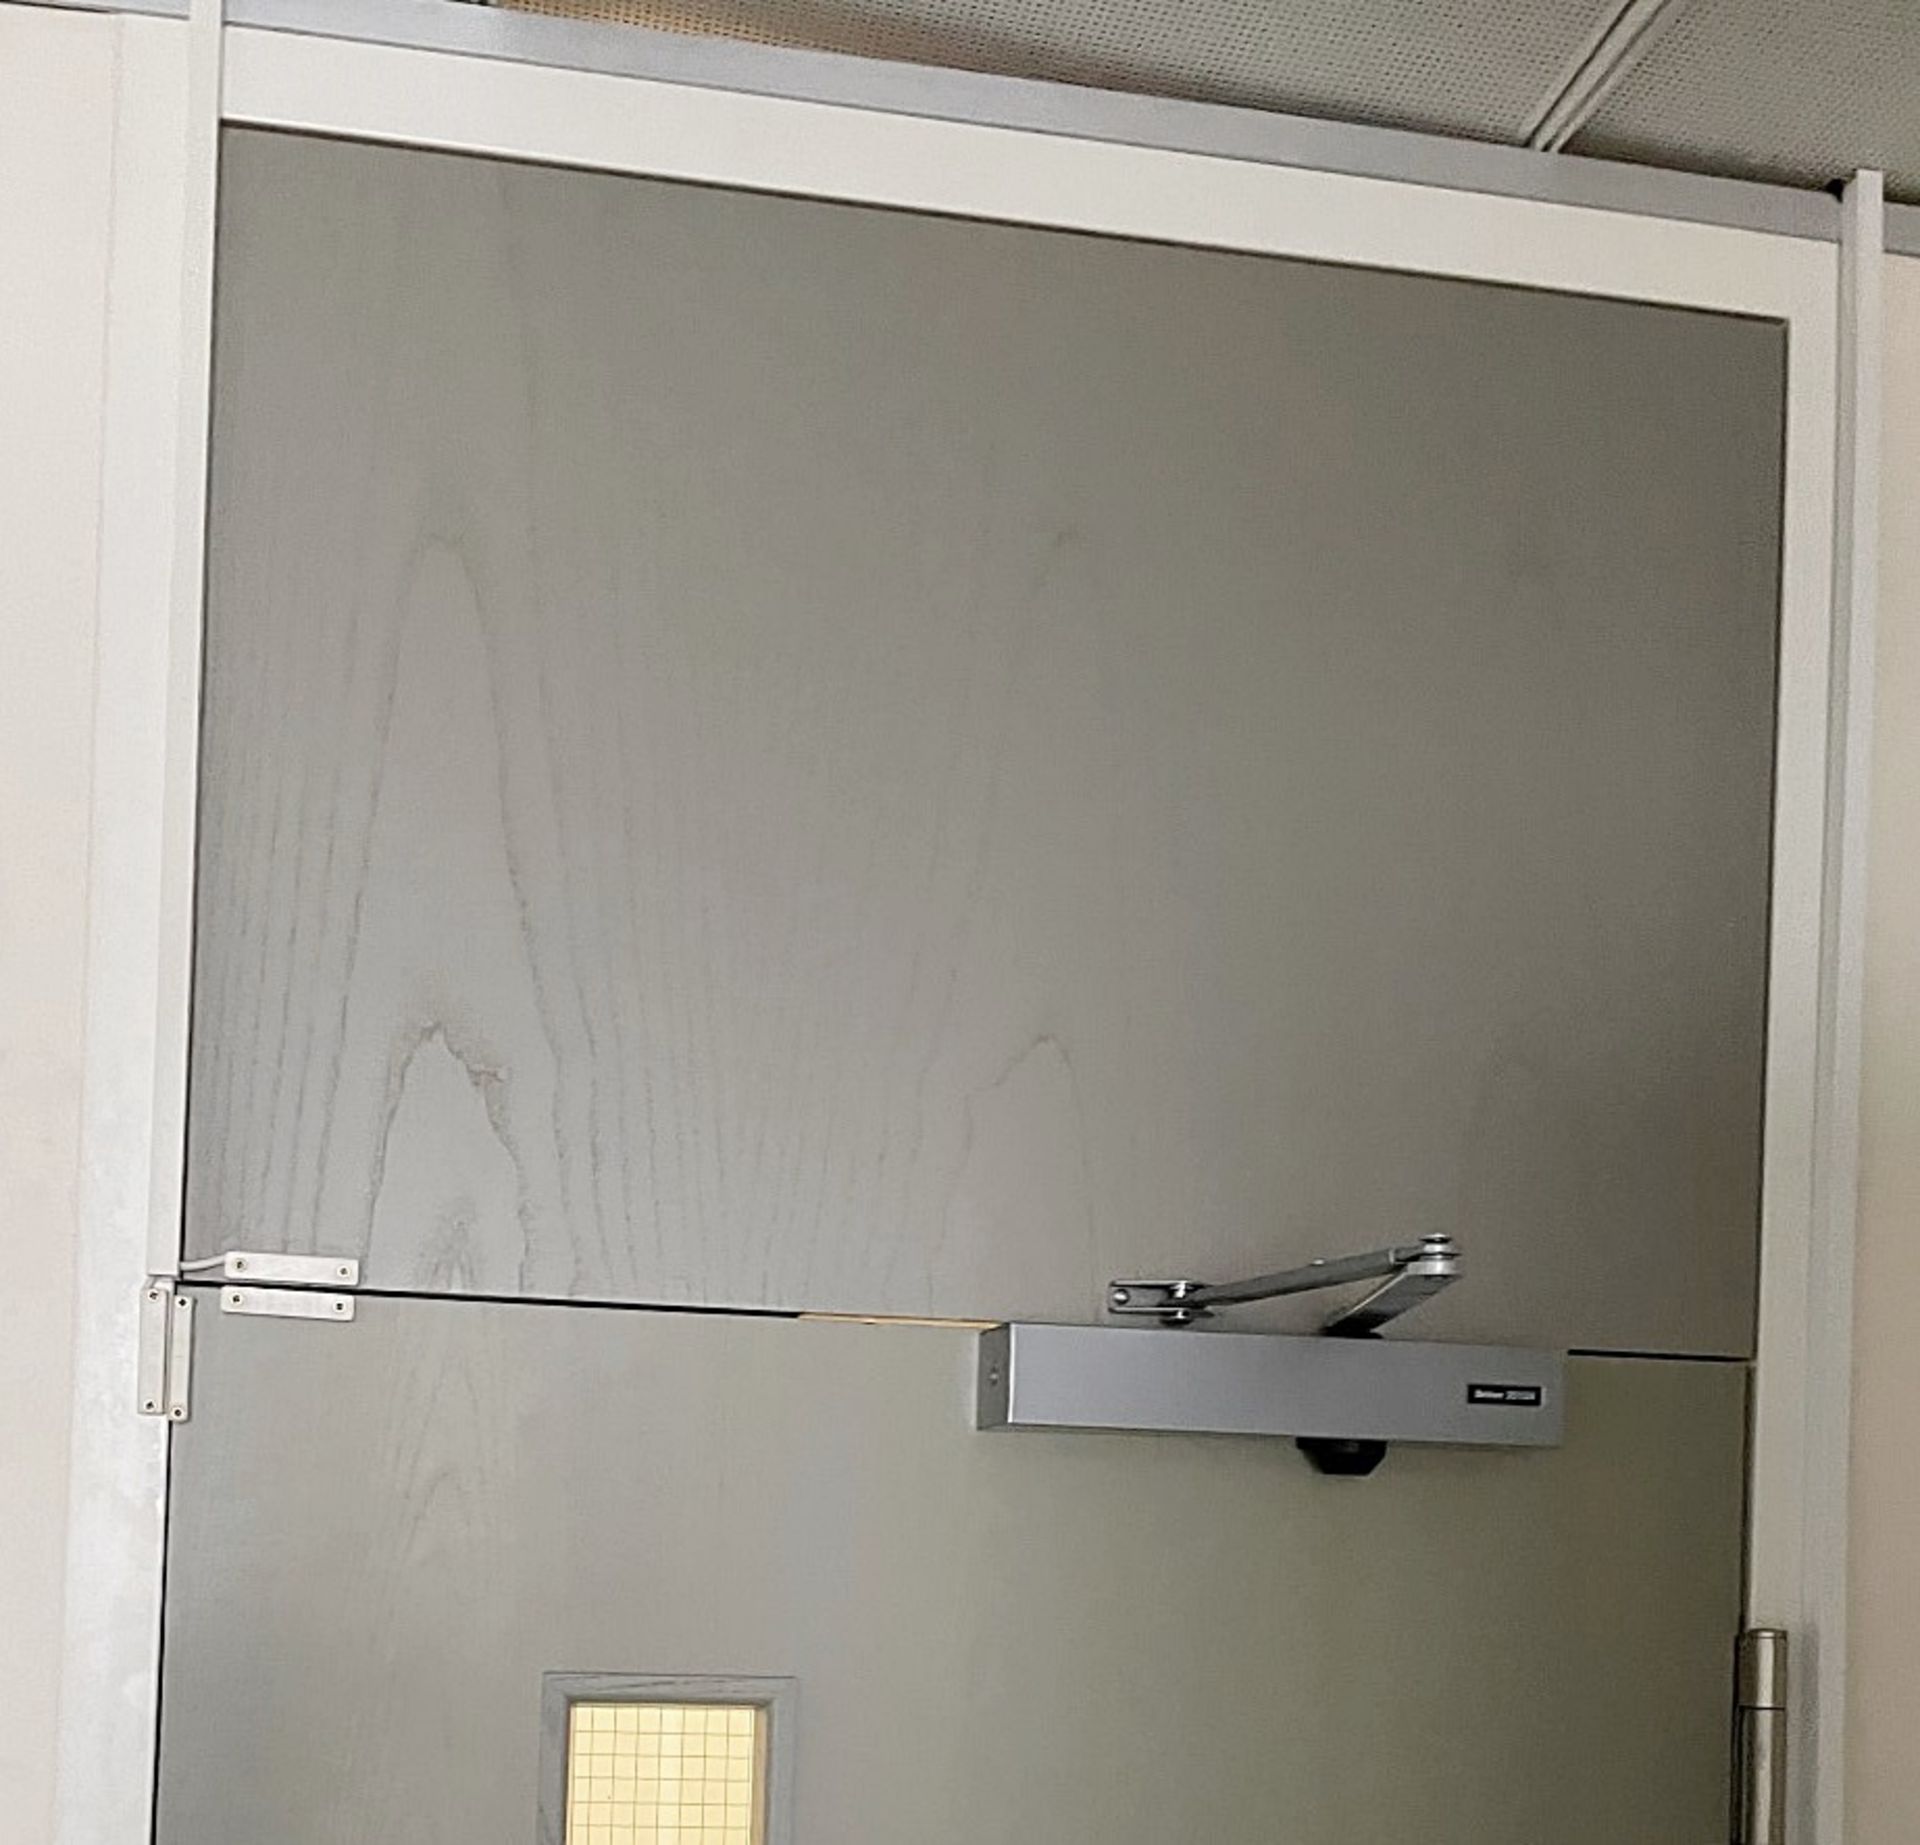 1 x Door With Top Panel And Closer - Dimensions: W100 x H265cm - Ref: ED183 - To Be Removed From - Image 3 of 3